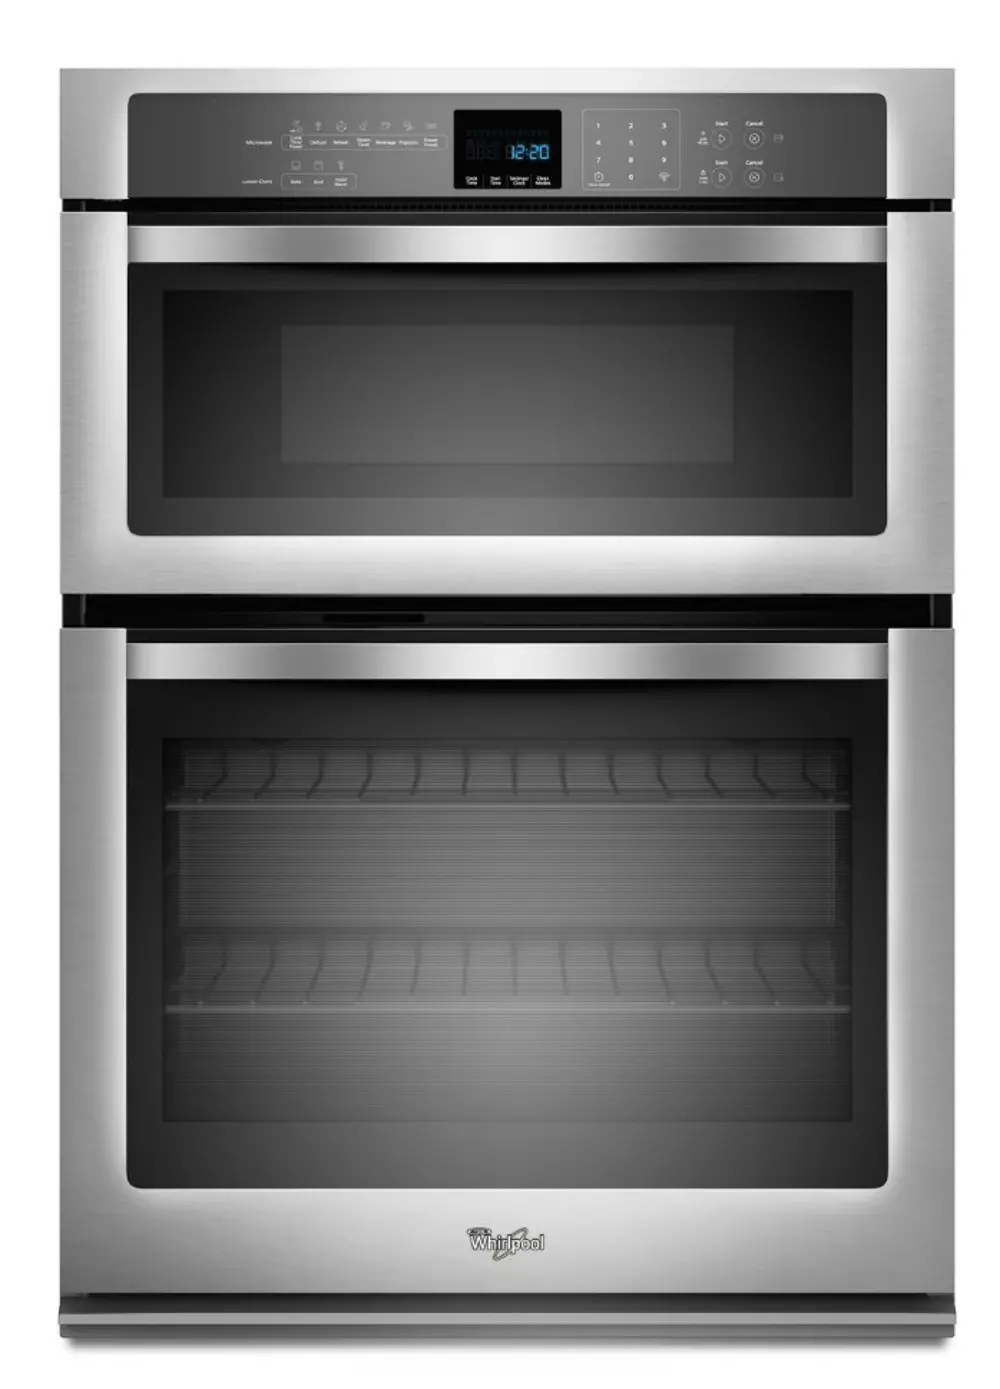 WOC54EC0AS Whirlpool Double Wall Oven with Microwave - 6.4 cu. ft. Stainless Steel-1